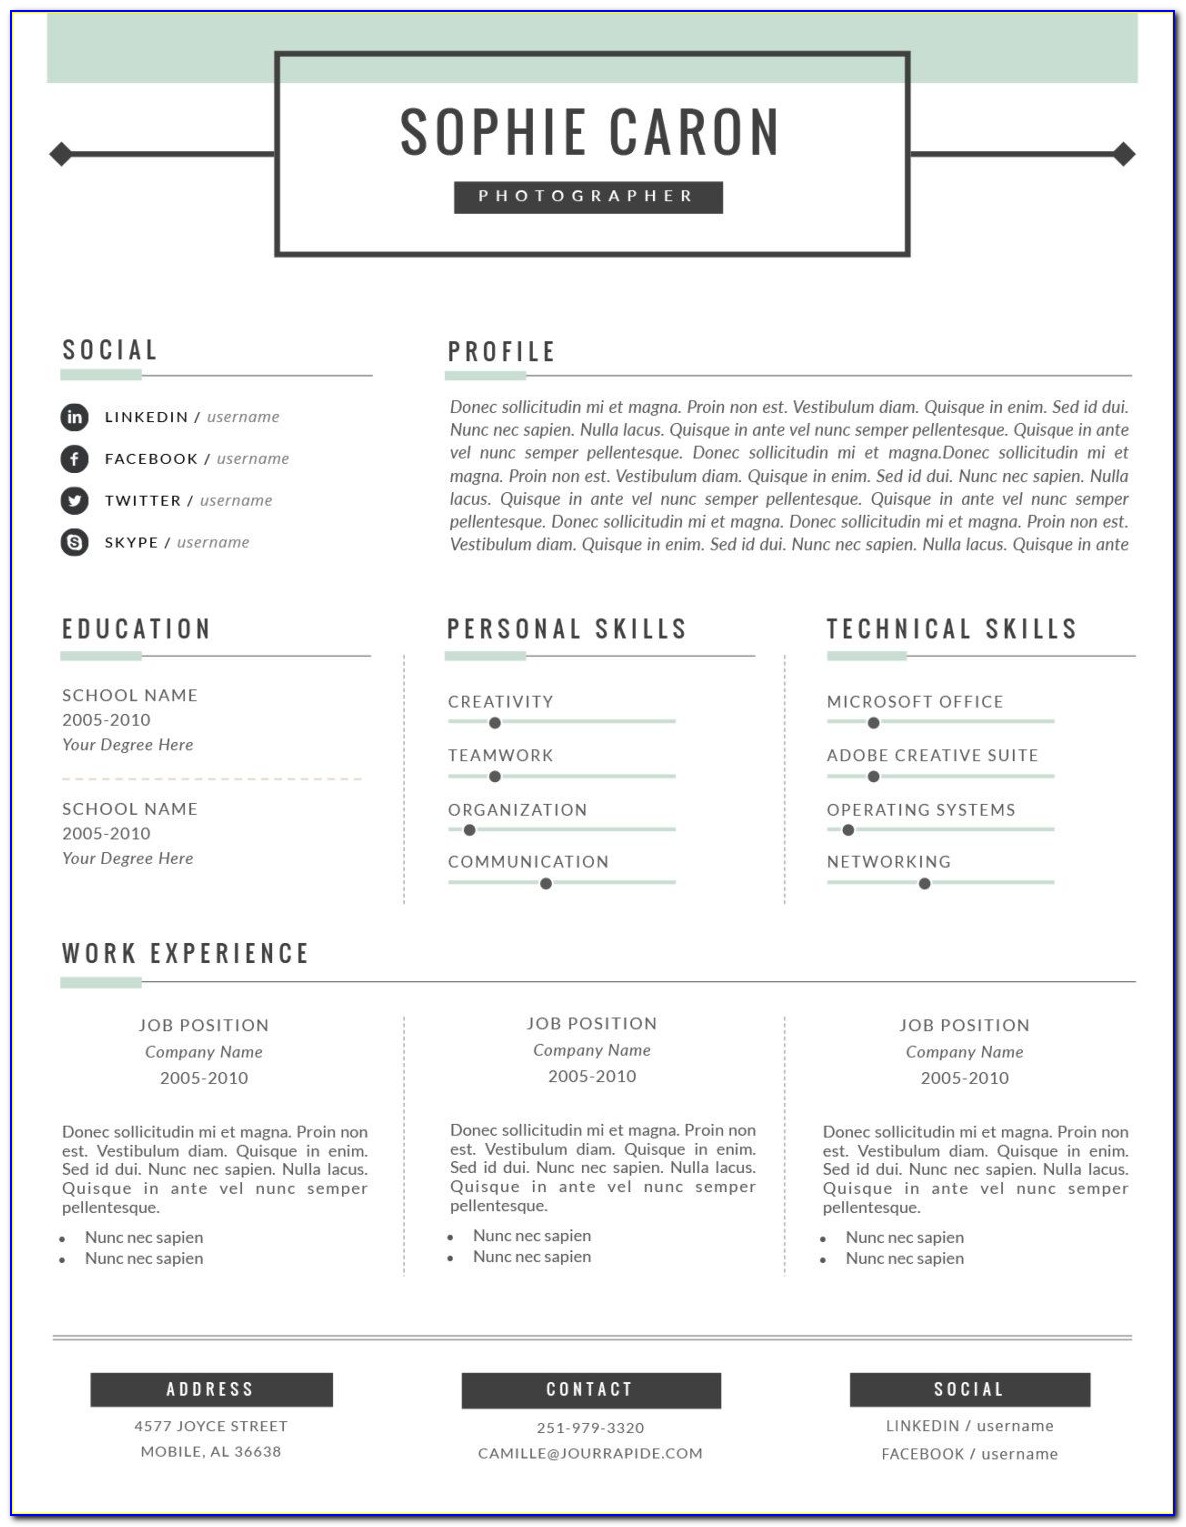 Free Resume Templates For Engineers